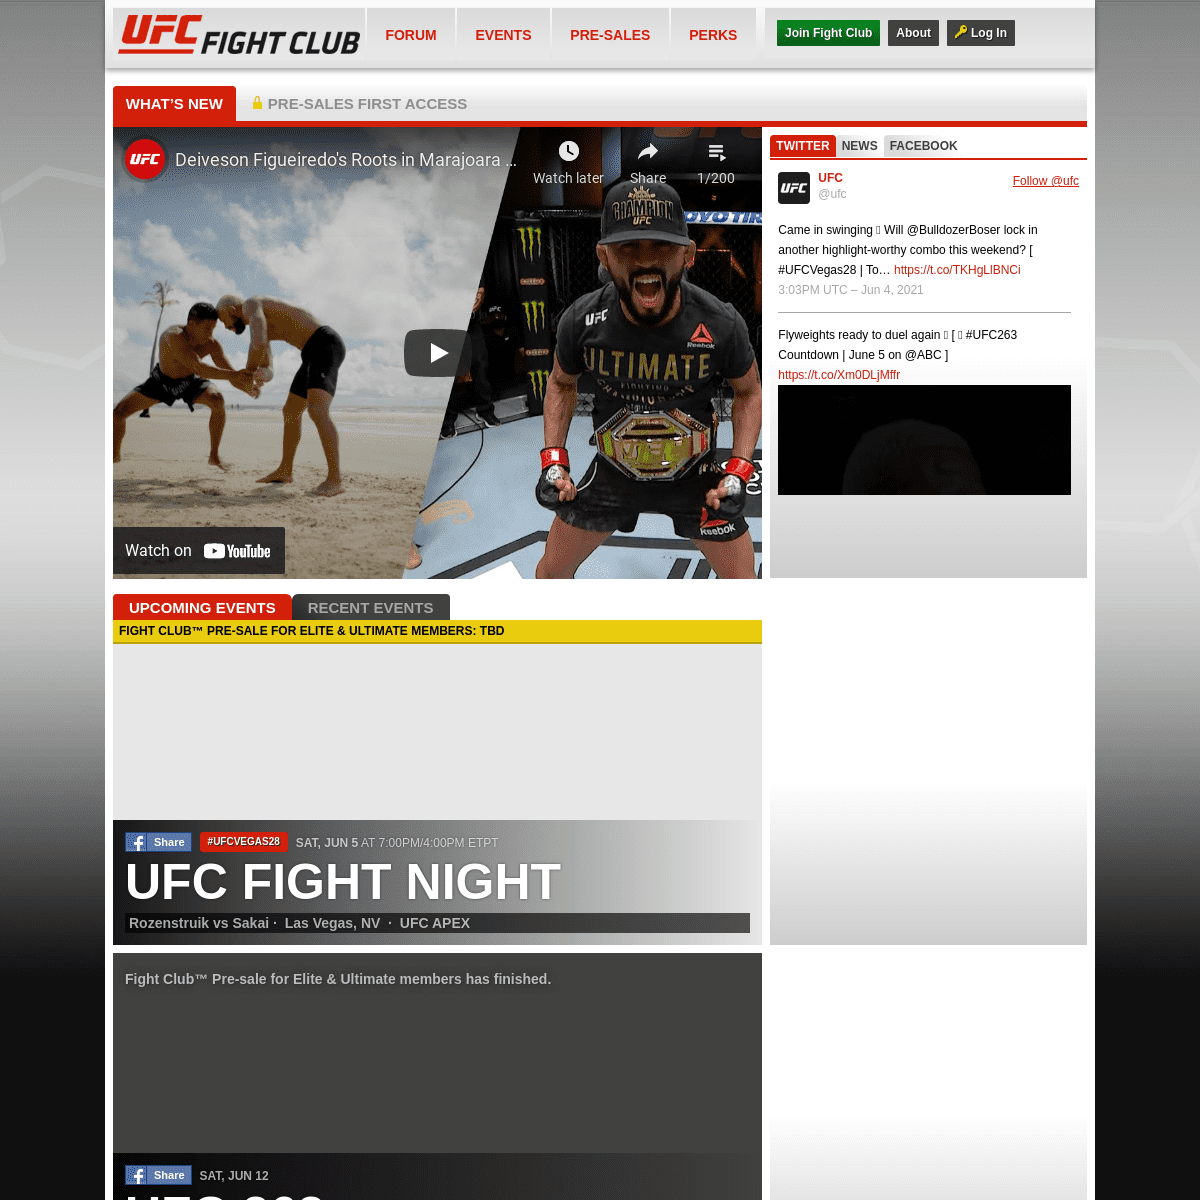 A complete backup of https://ufcfightclub.com